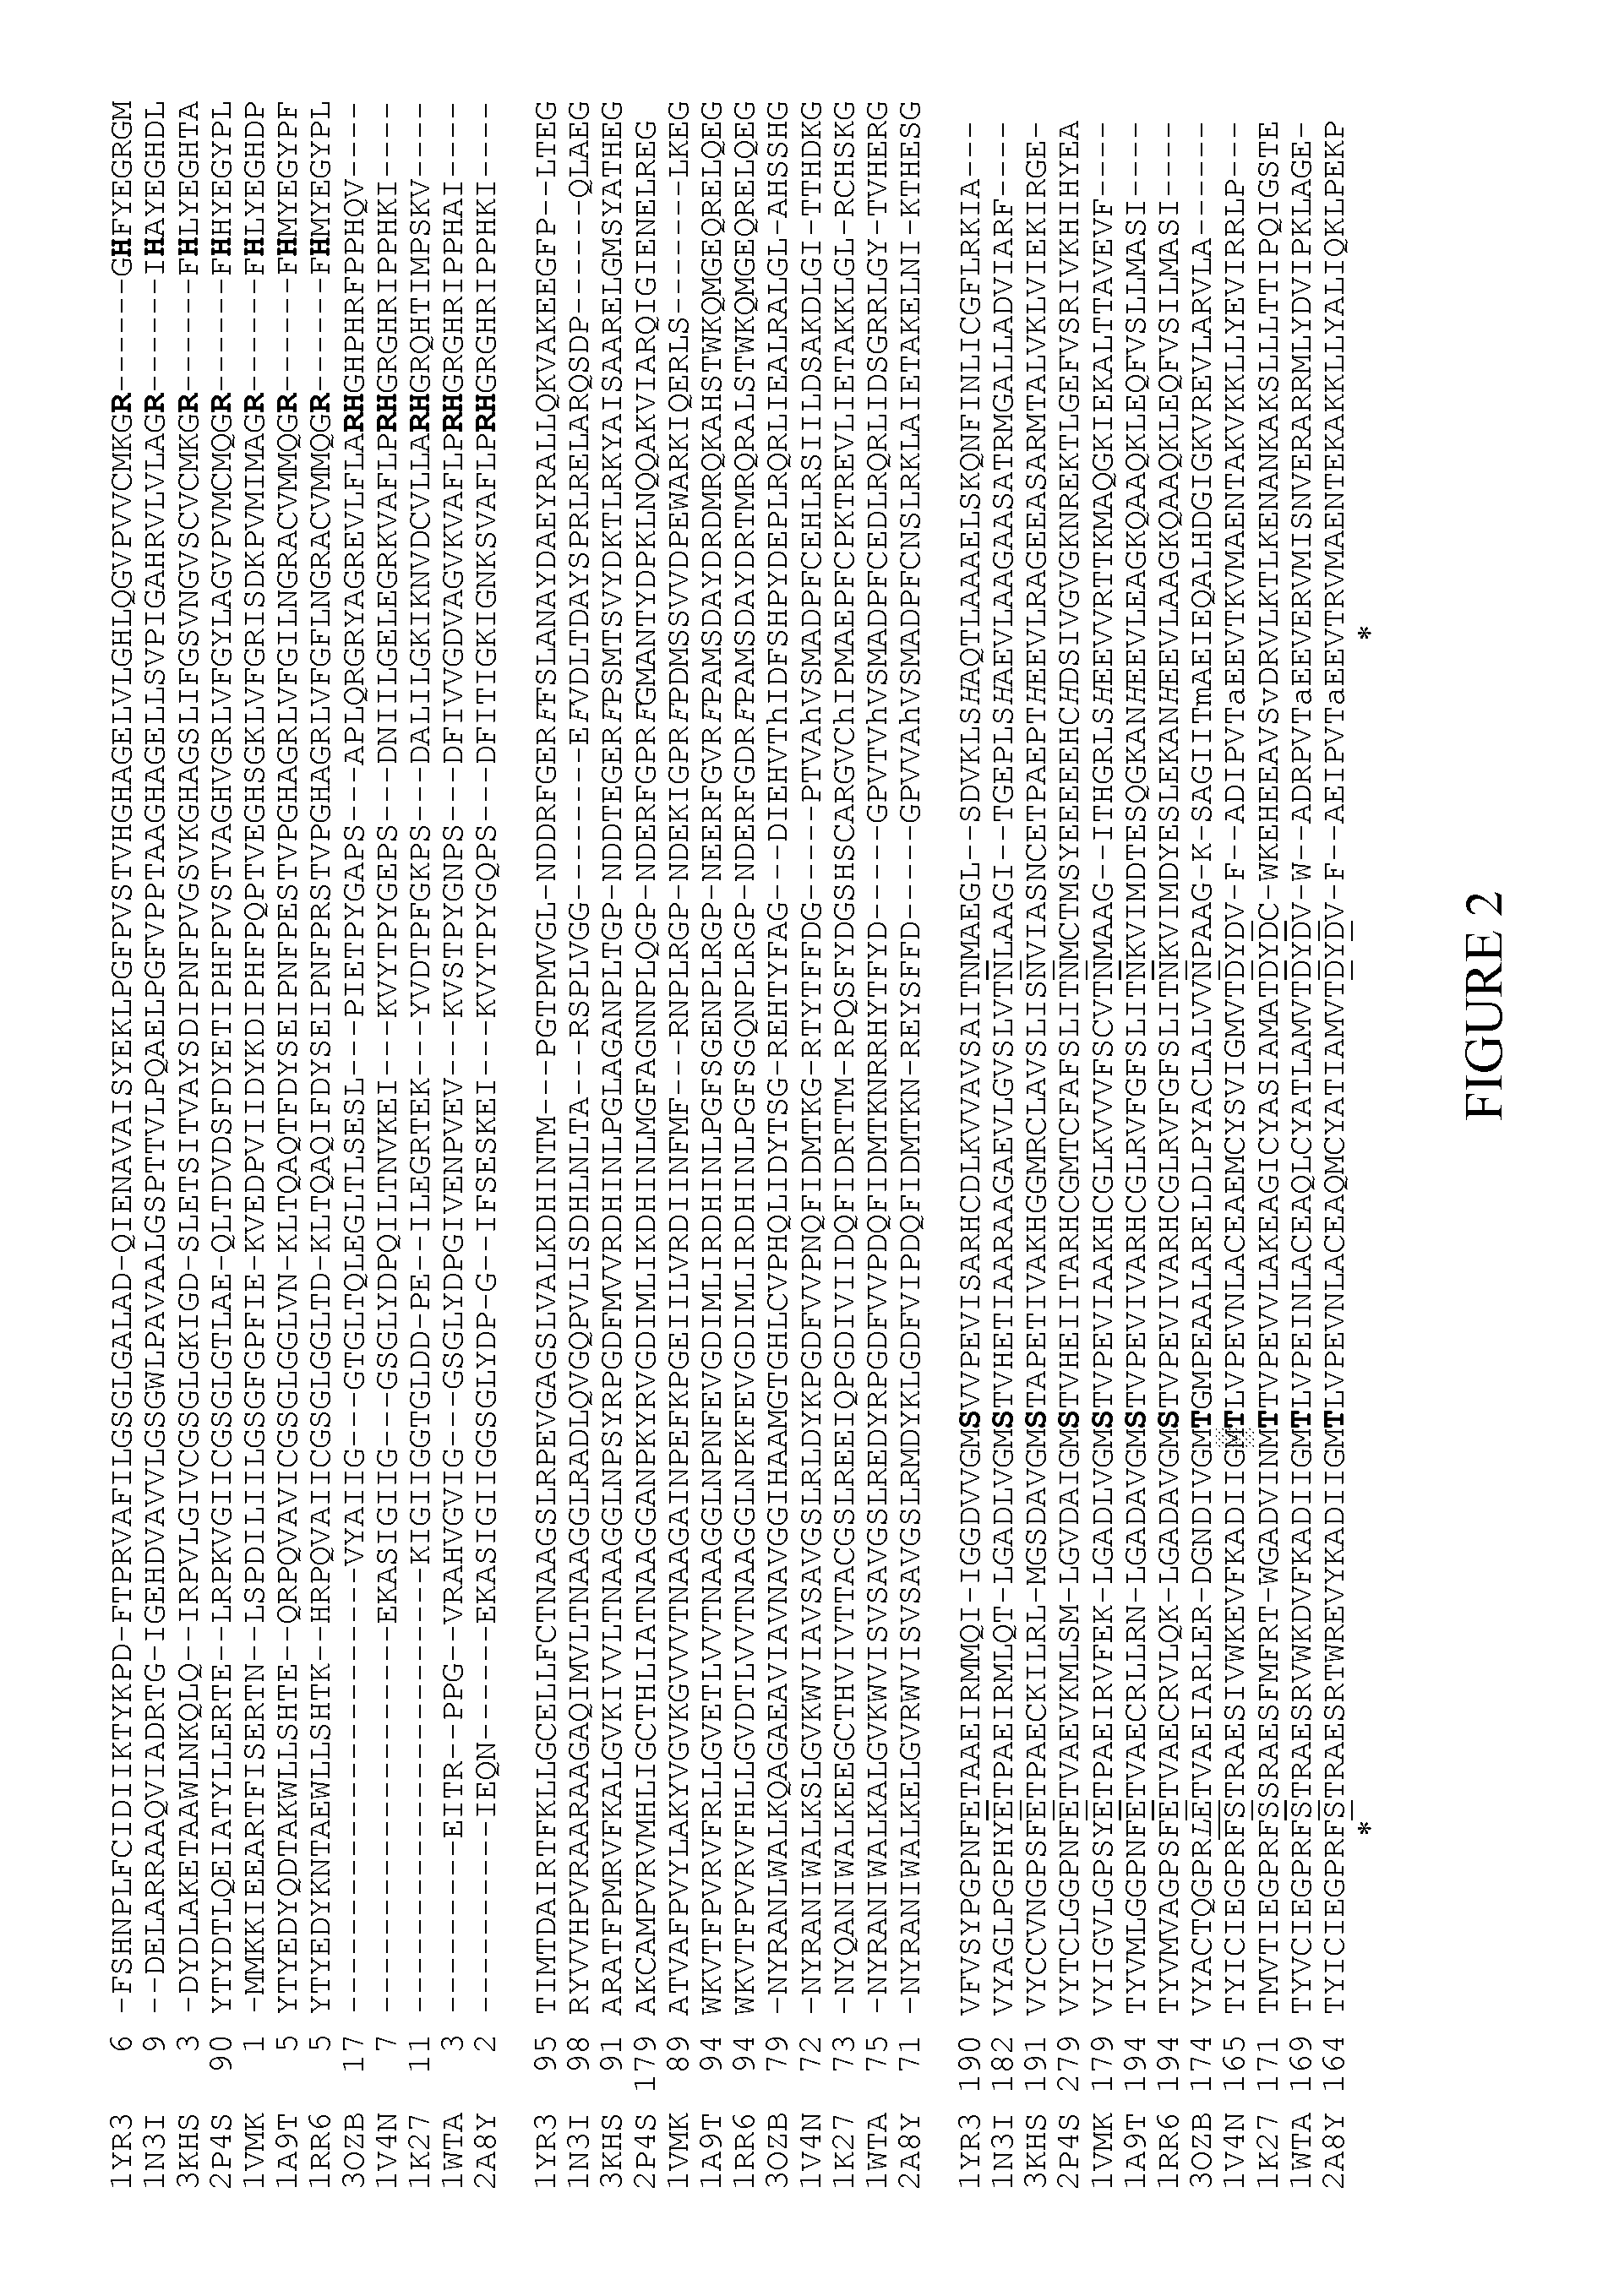 Methods, assays and compounds for treating bacterial infections by inhibiting methylthioinosine phosphorylase